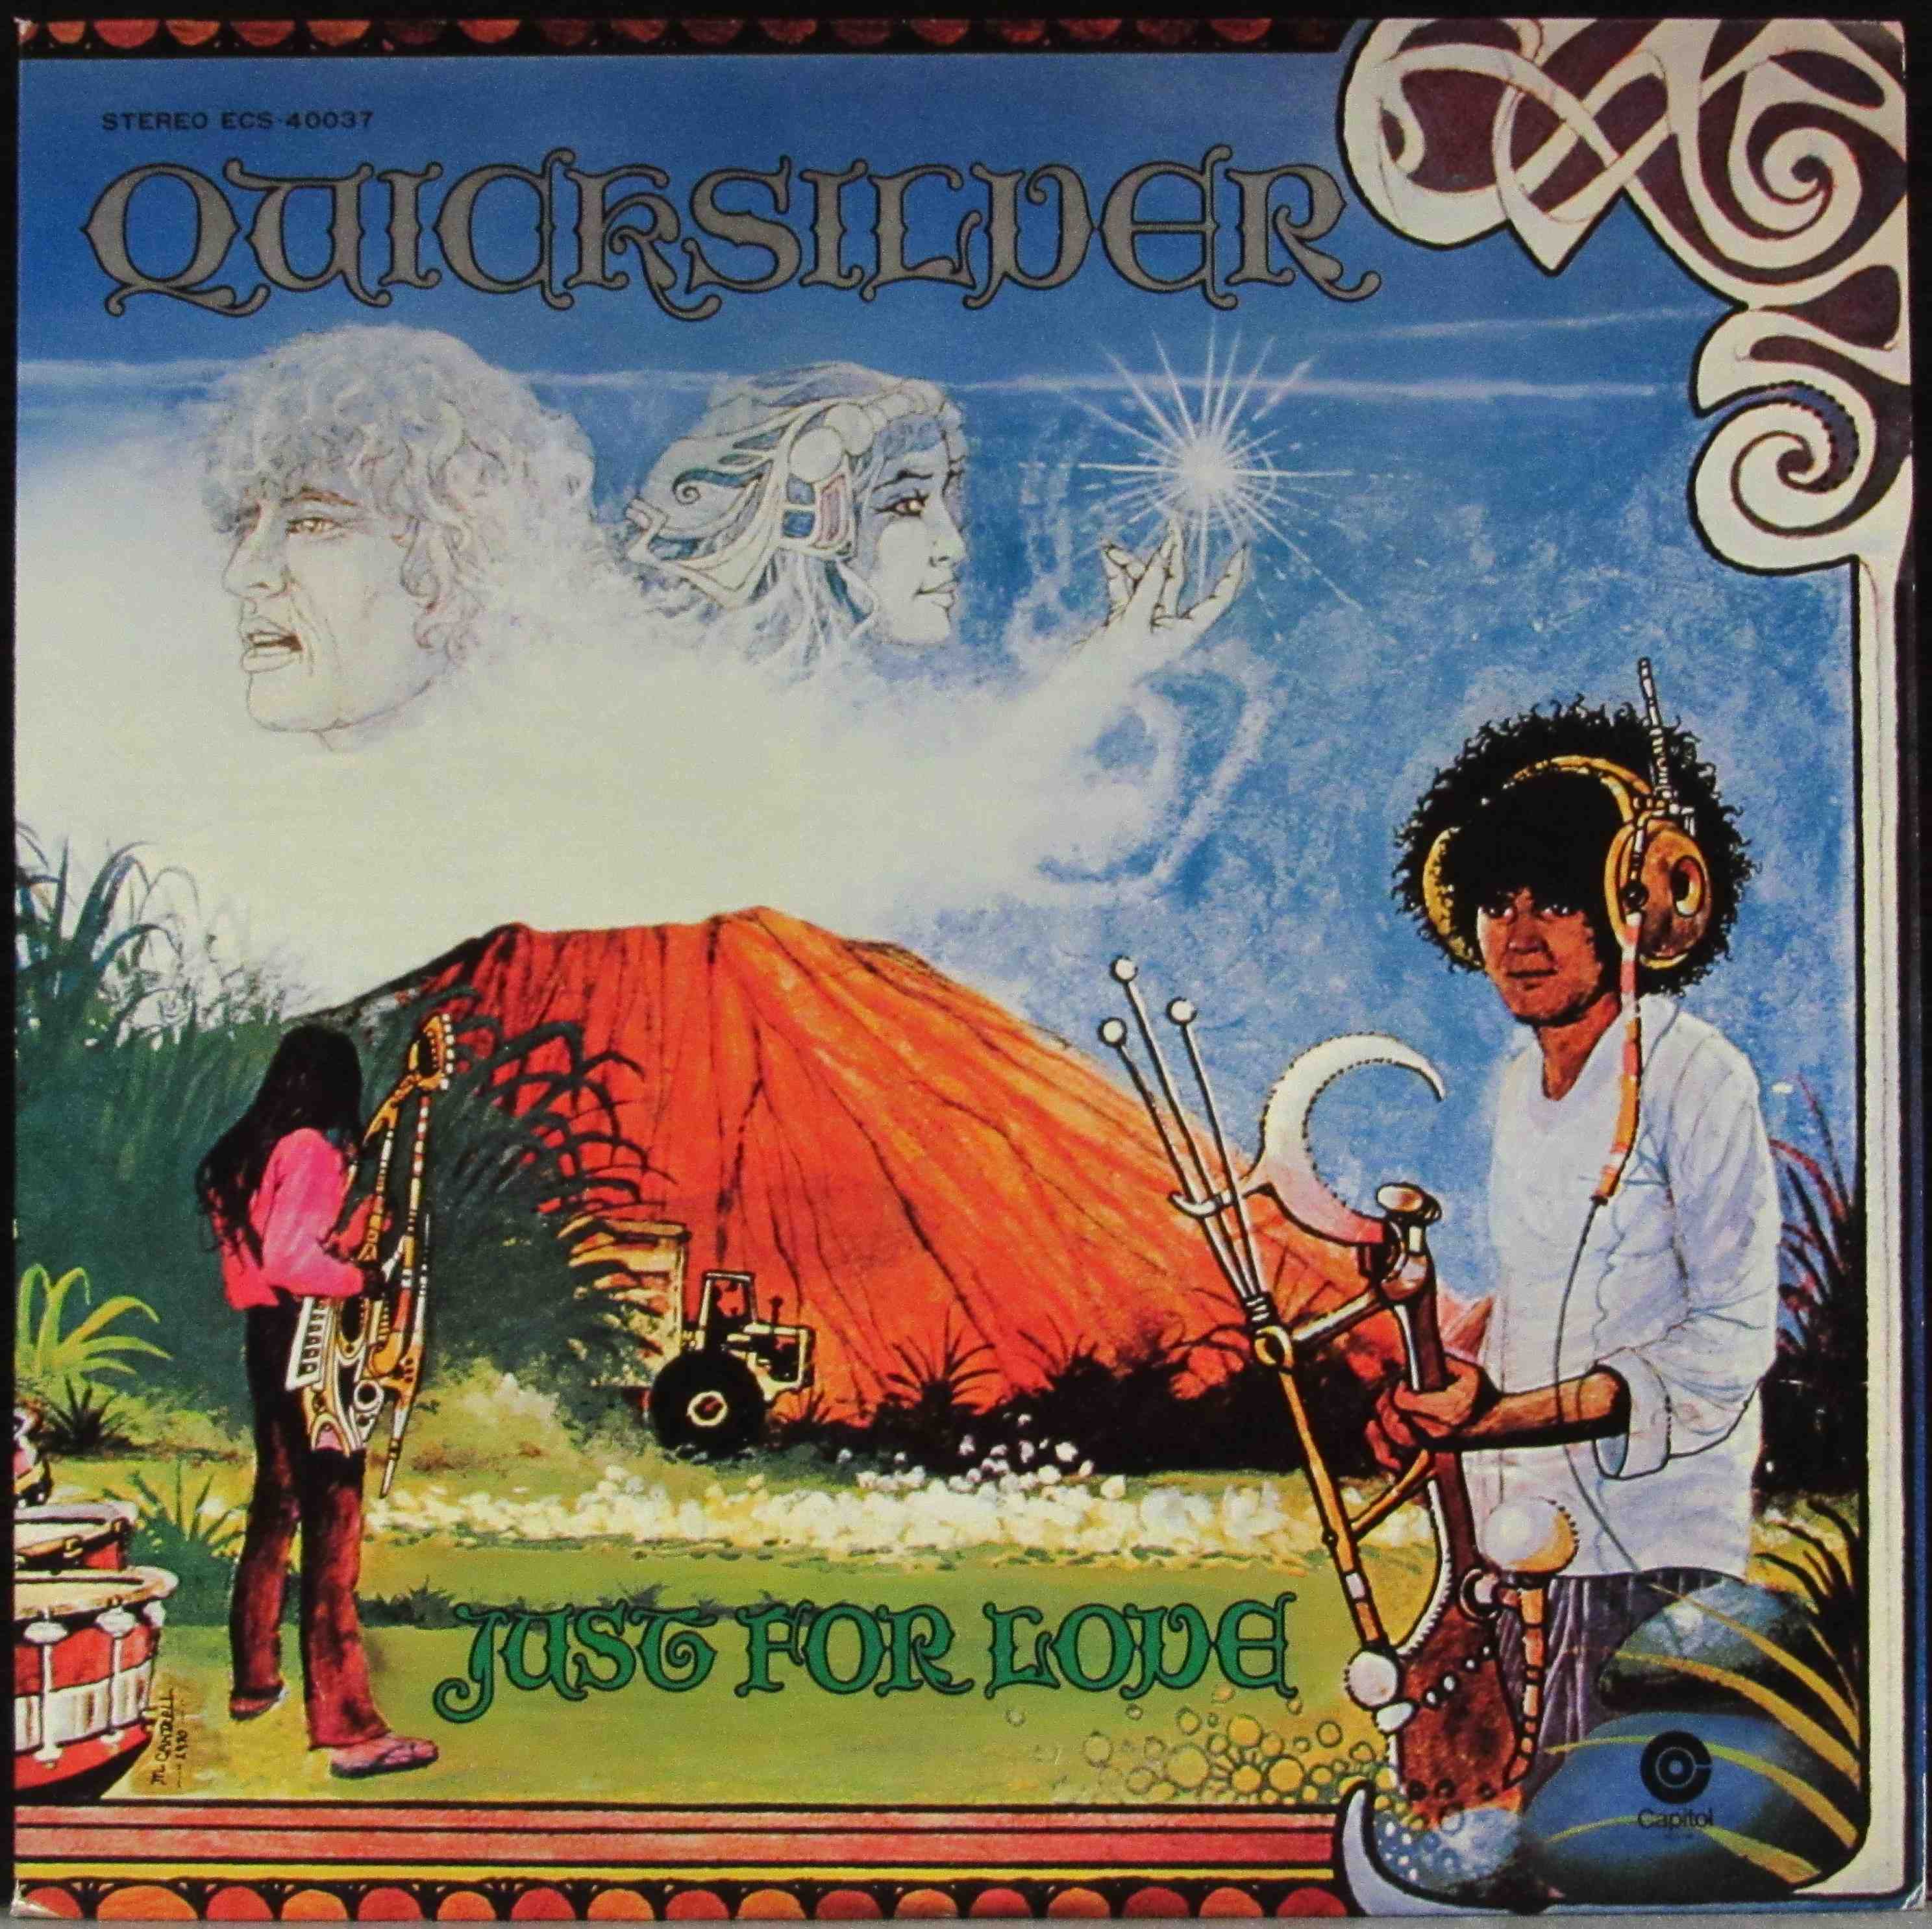 Quicksilver messenger. Quicksilver Messenger service 1968. Quicksilver Messenger service. Quicksilver Messenger service - just for Love. Quicksilver Messenger service Happy Trails.